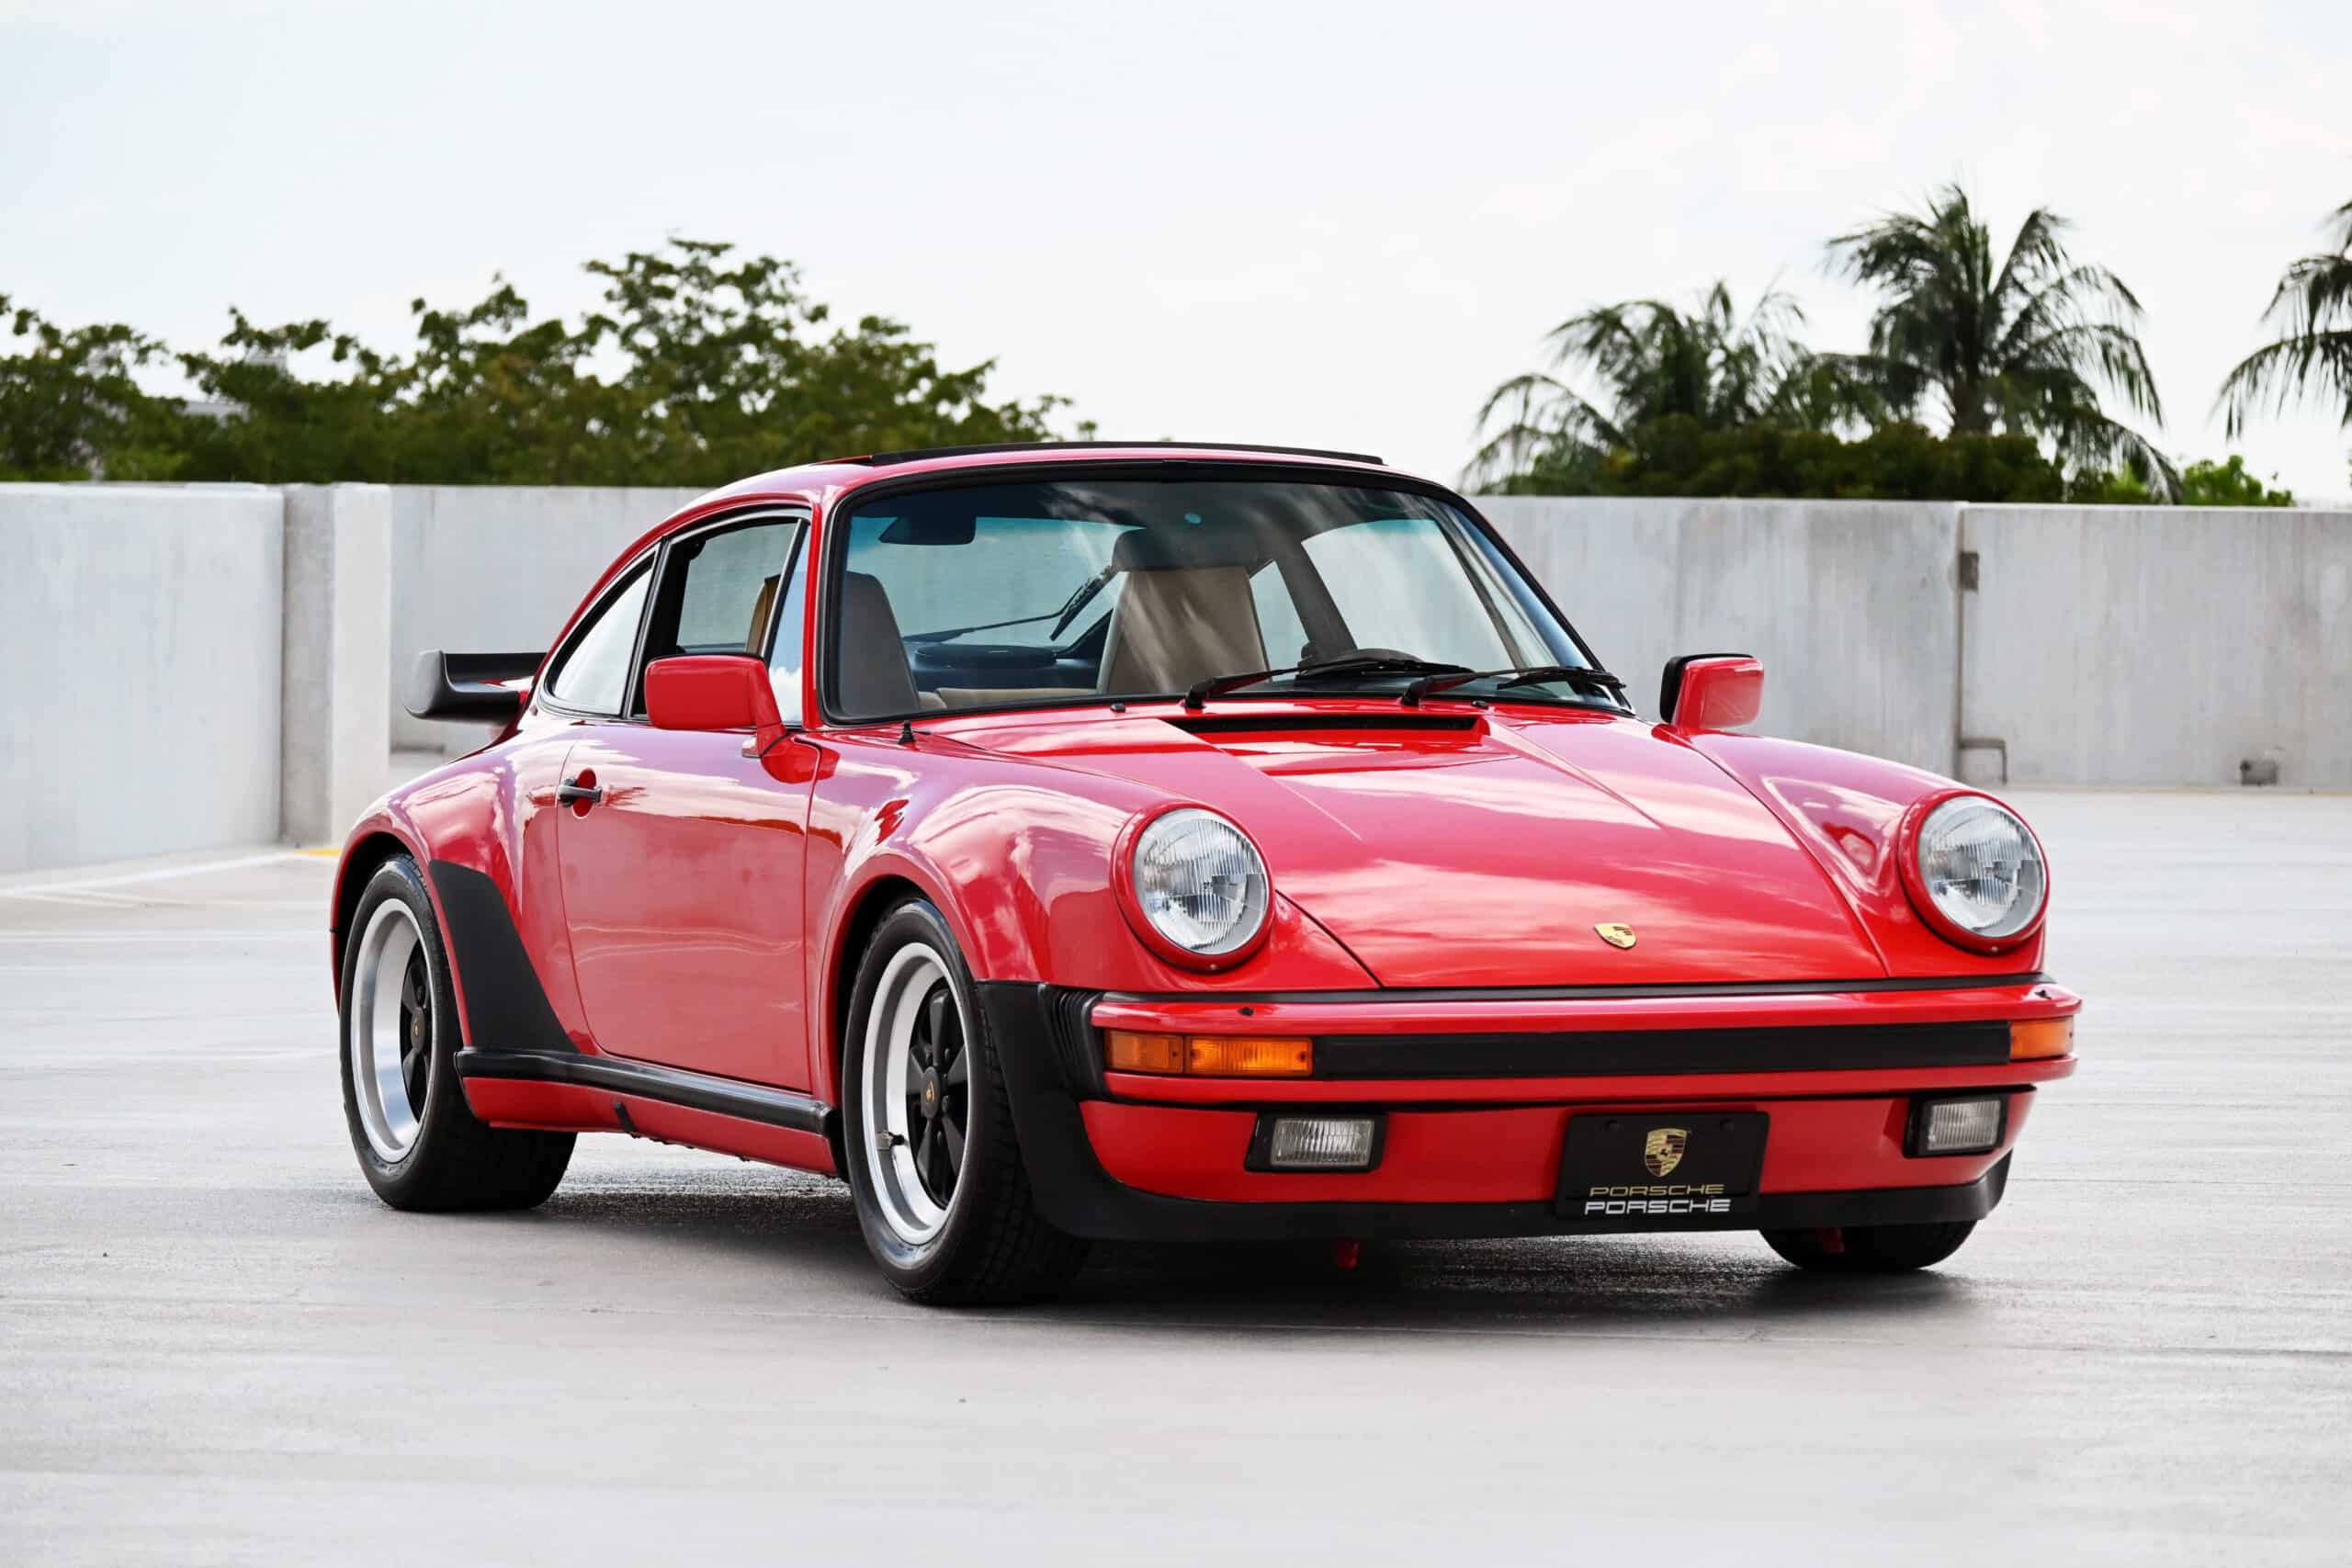 1986 Porsche 930 Red /Champagne Unmodified / 46K Actual Miles / Meticulous Ownership for 27 Years / Factory Sport Seats & LSD / Outstanding Condition / Dealer serviced